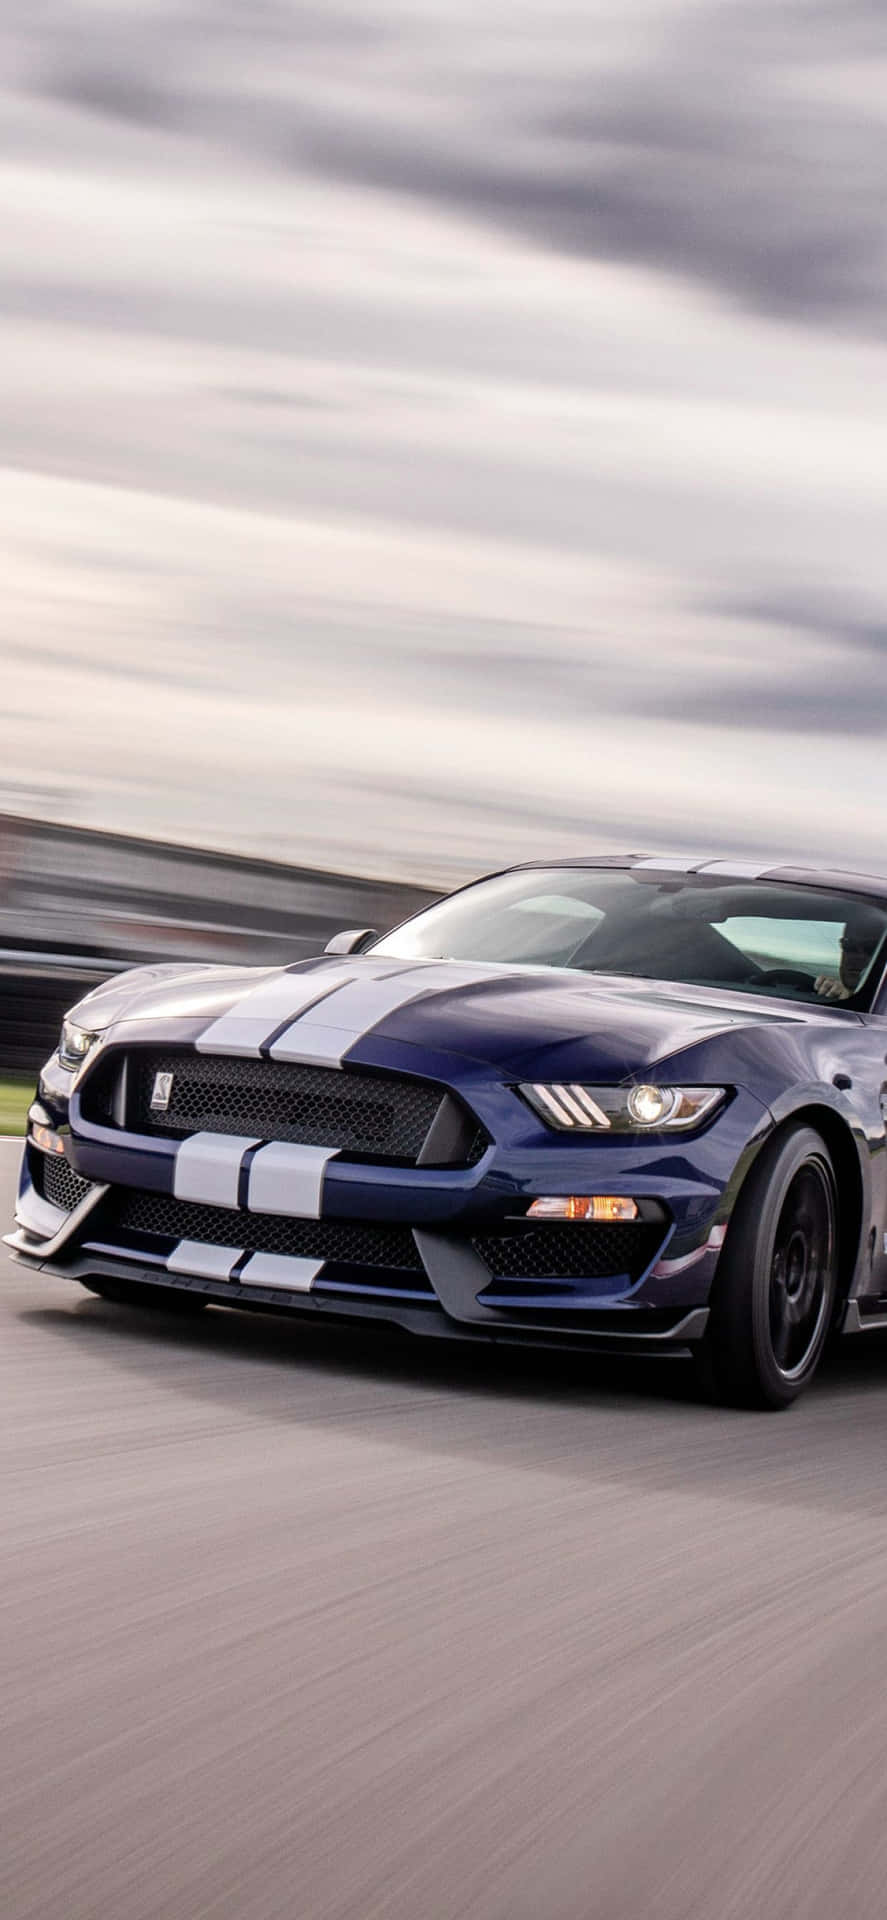 Stunning Ford Mustang Shelby GT350 in Action Wallpaper